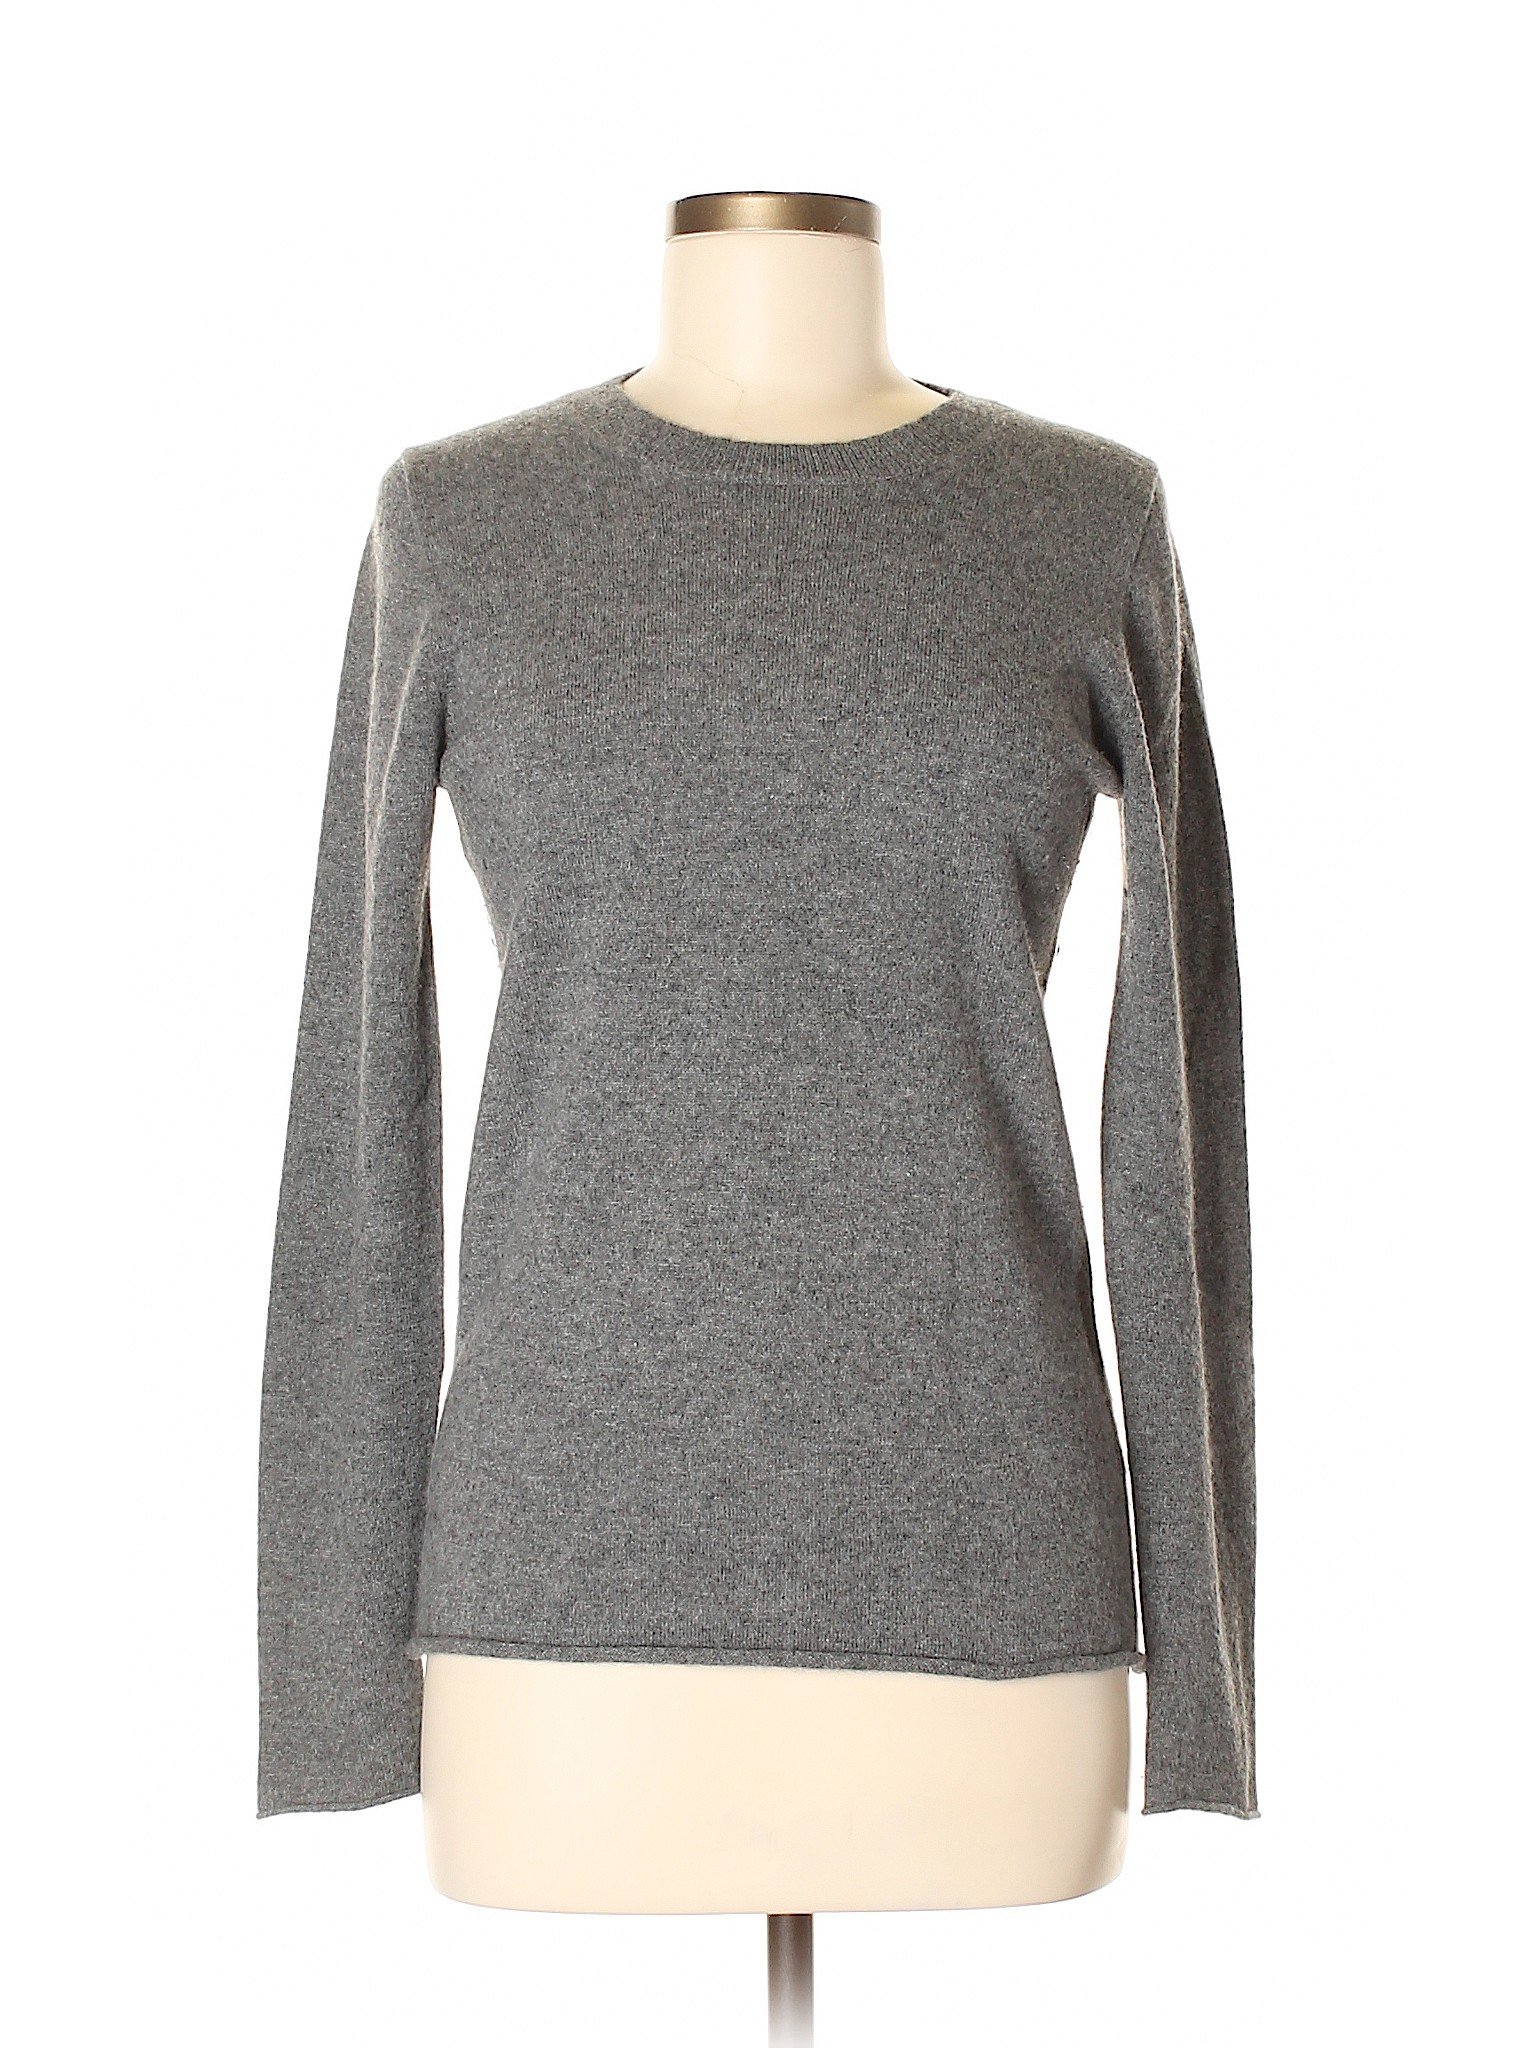 J.Crew Collection 100% Cashmere Solid Gray Cashmere Pullover Sweater ...